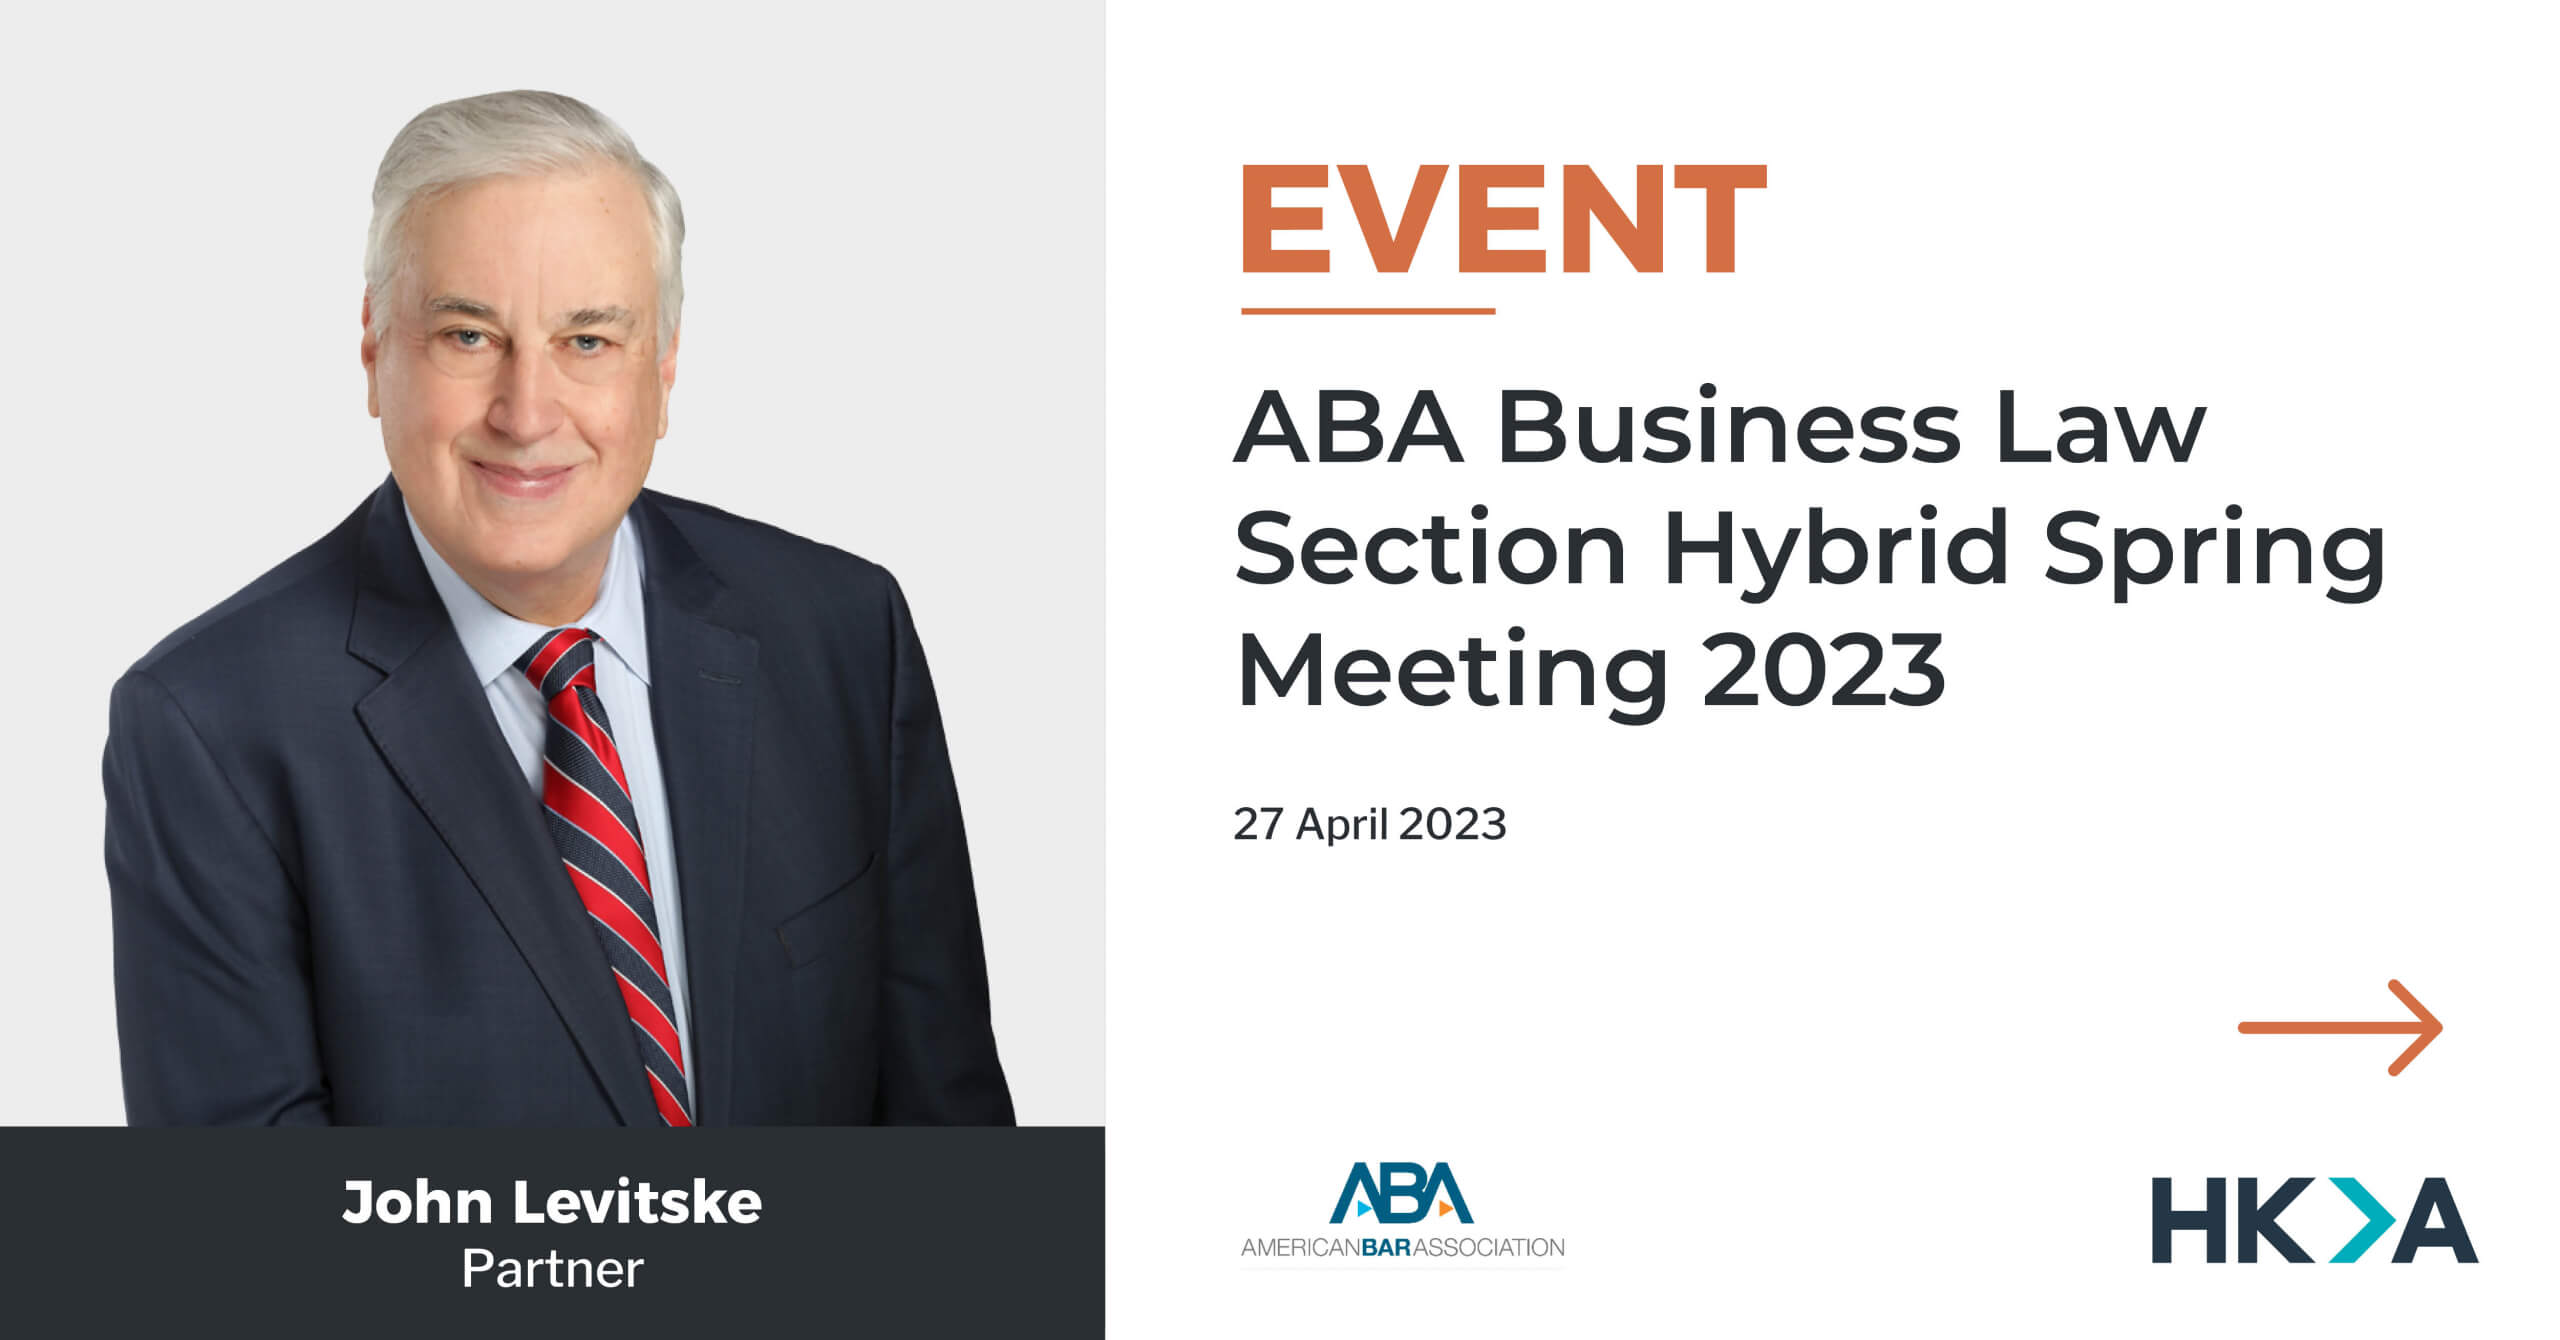 ABA Business Law Section Hybrid Spring Meeting 2023 HKA